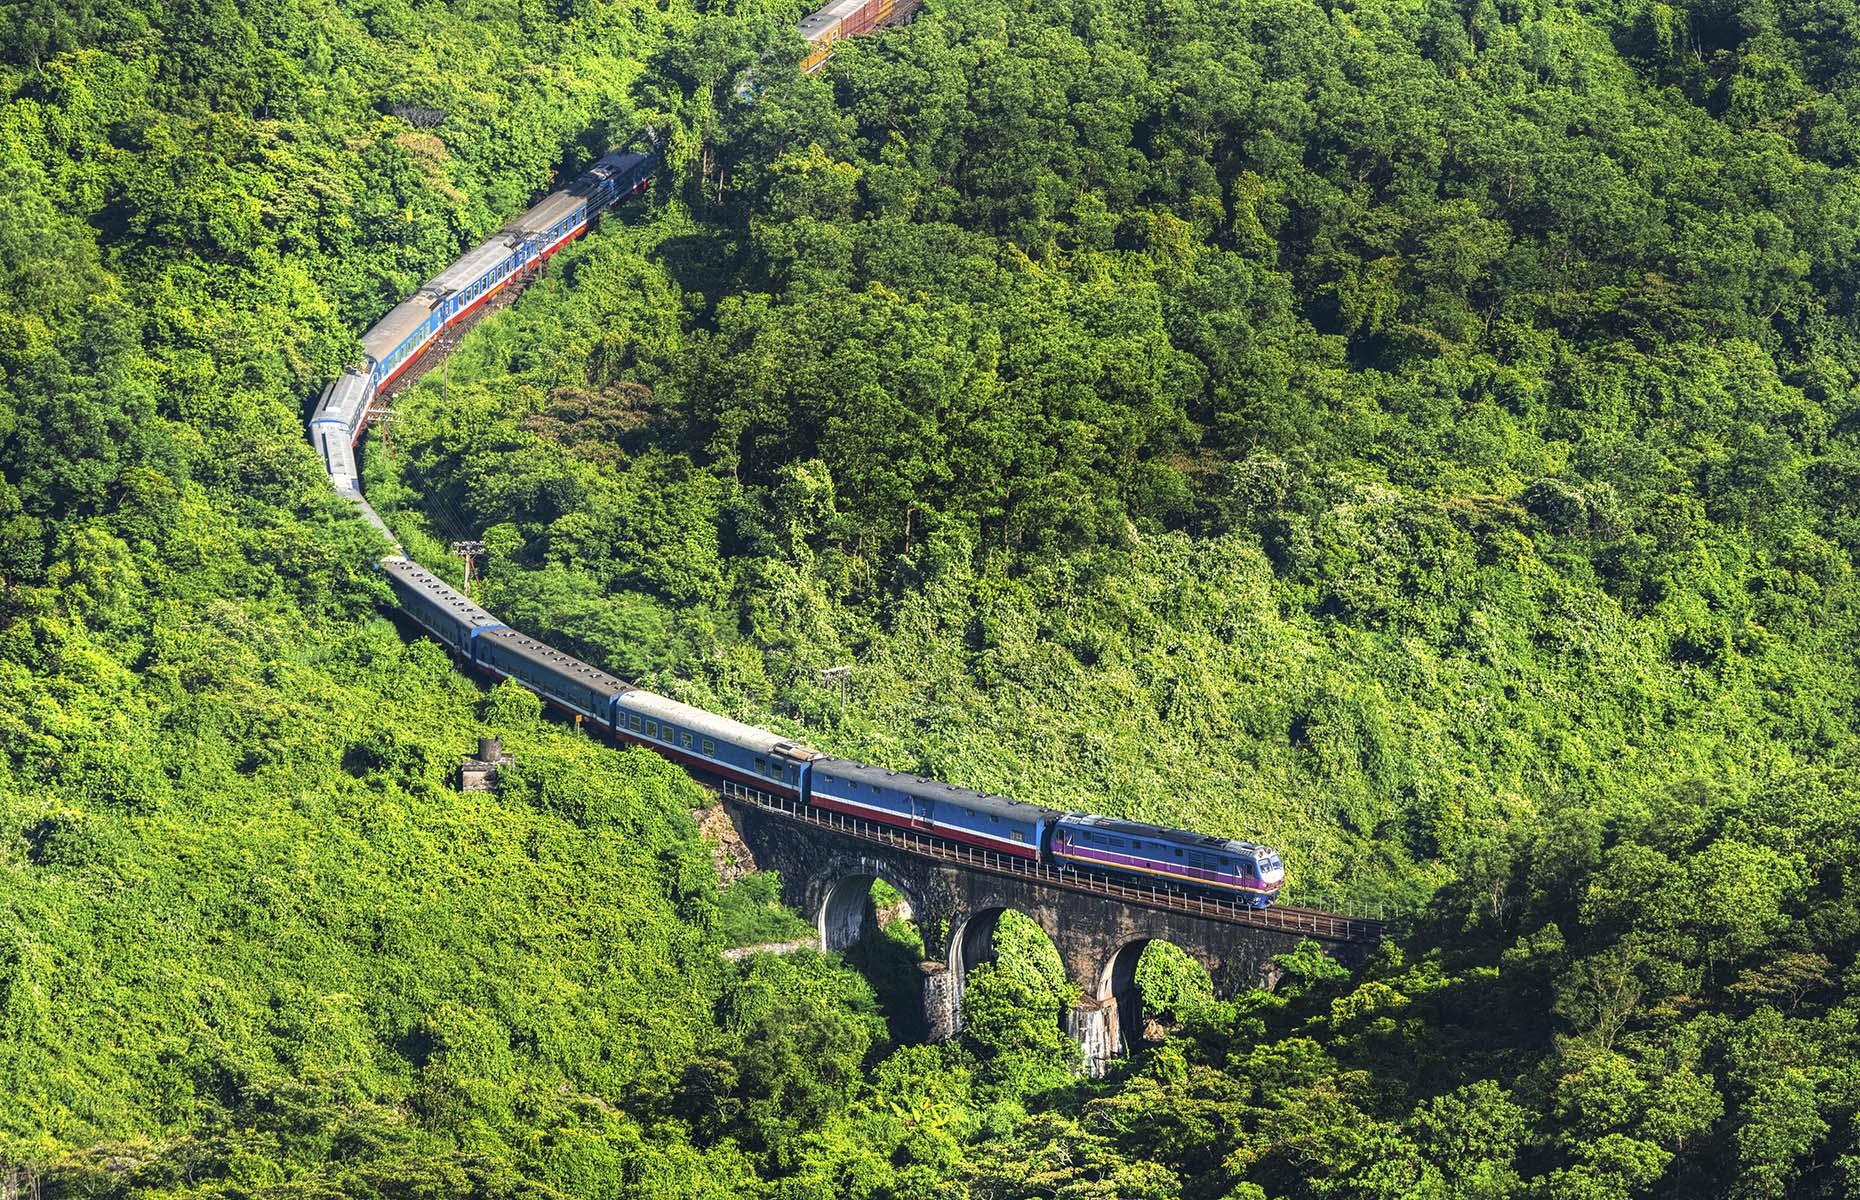 A trip on this train takes in breathtaking Vietnamese landscapes like Hải Vân Pass, Vân Phong Bay and the Annamite Range. Prices for the full, one-way journey between Hanoi and Ho Chi Minh City start from £53 ($64) for a soft seat while soft sleeper lower berths with air conditioning start from £74 ($90).